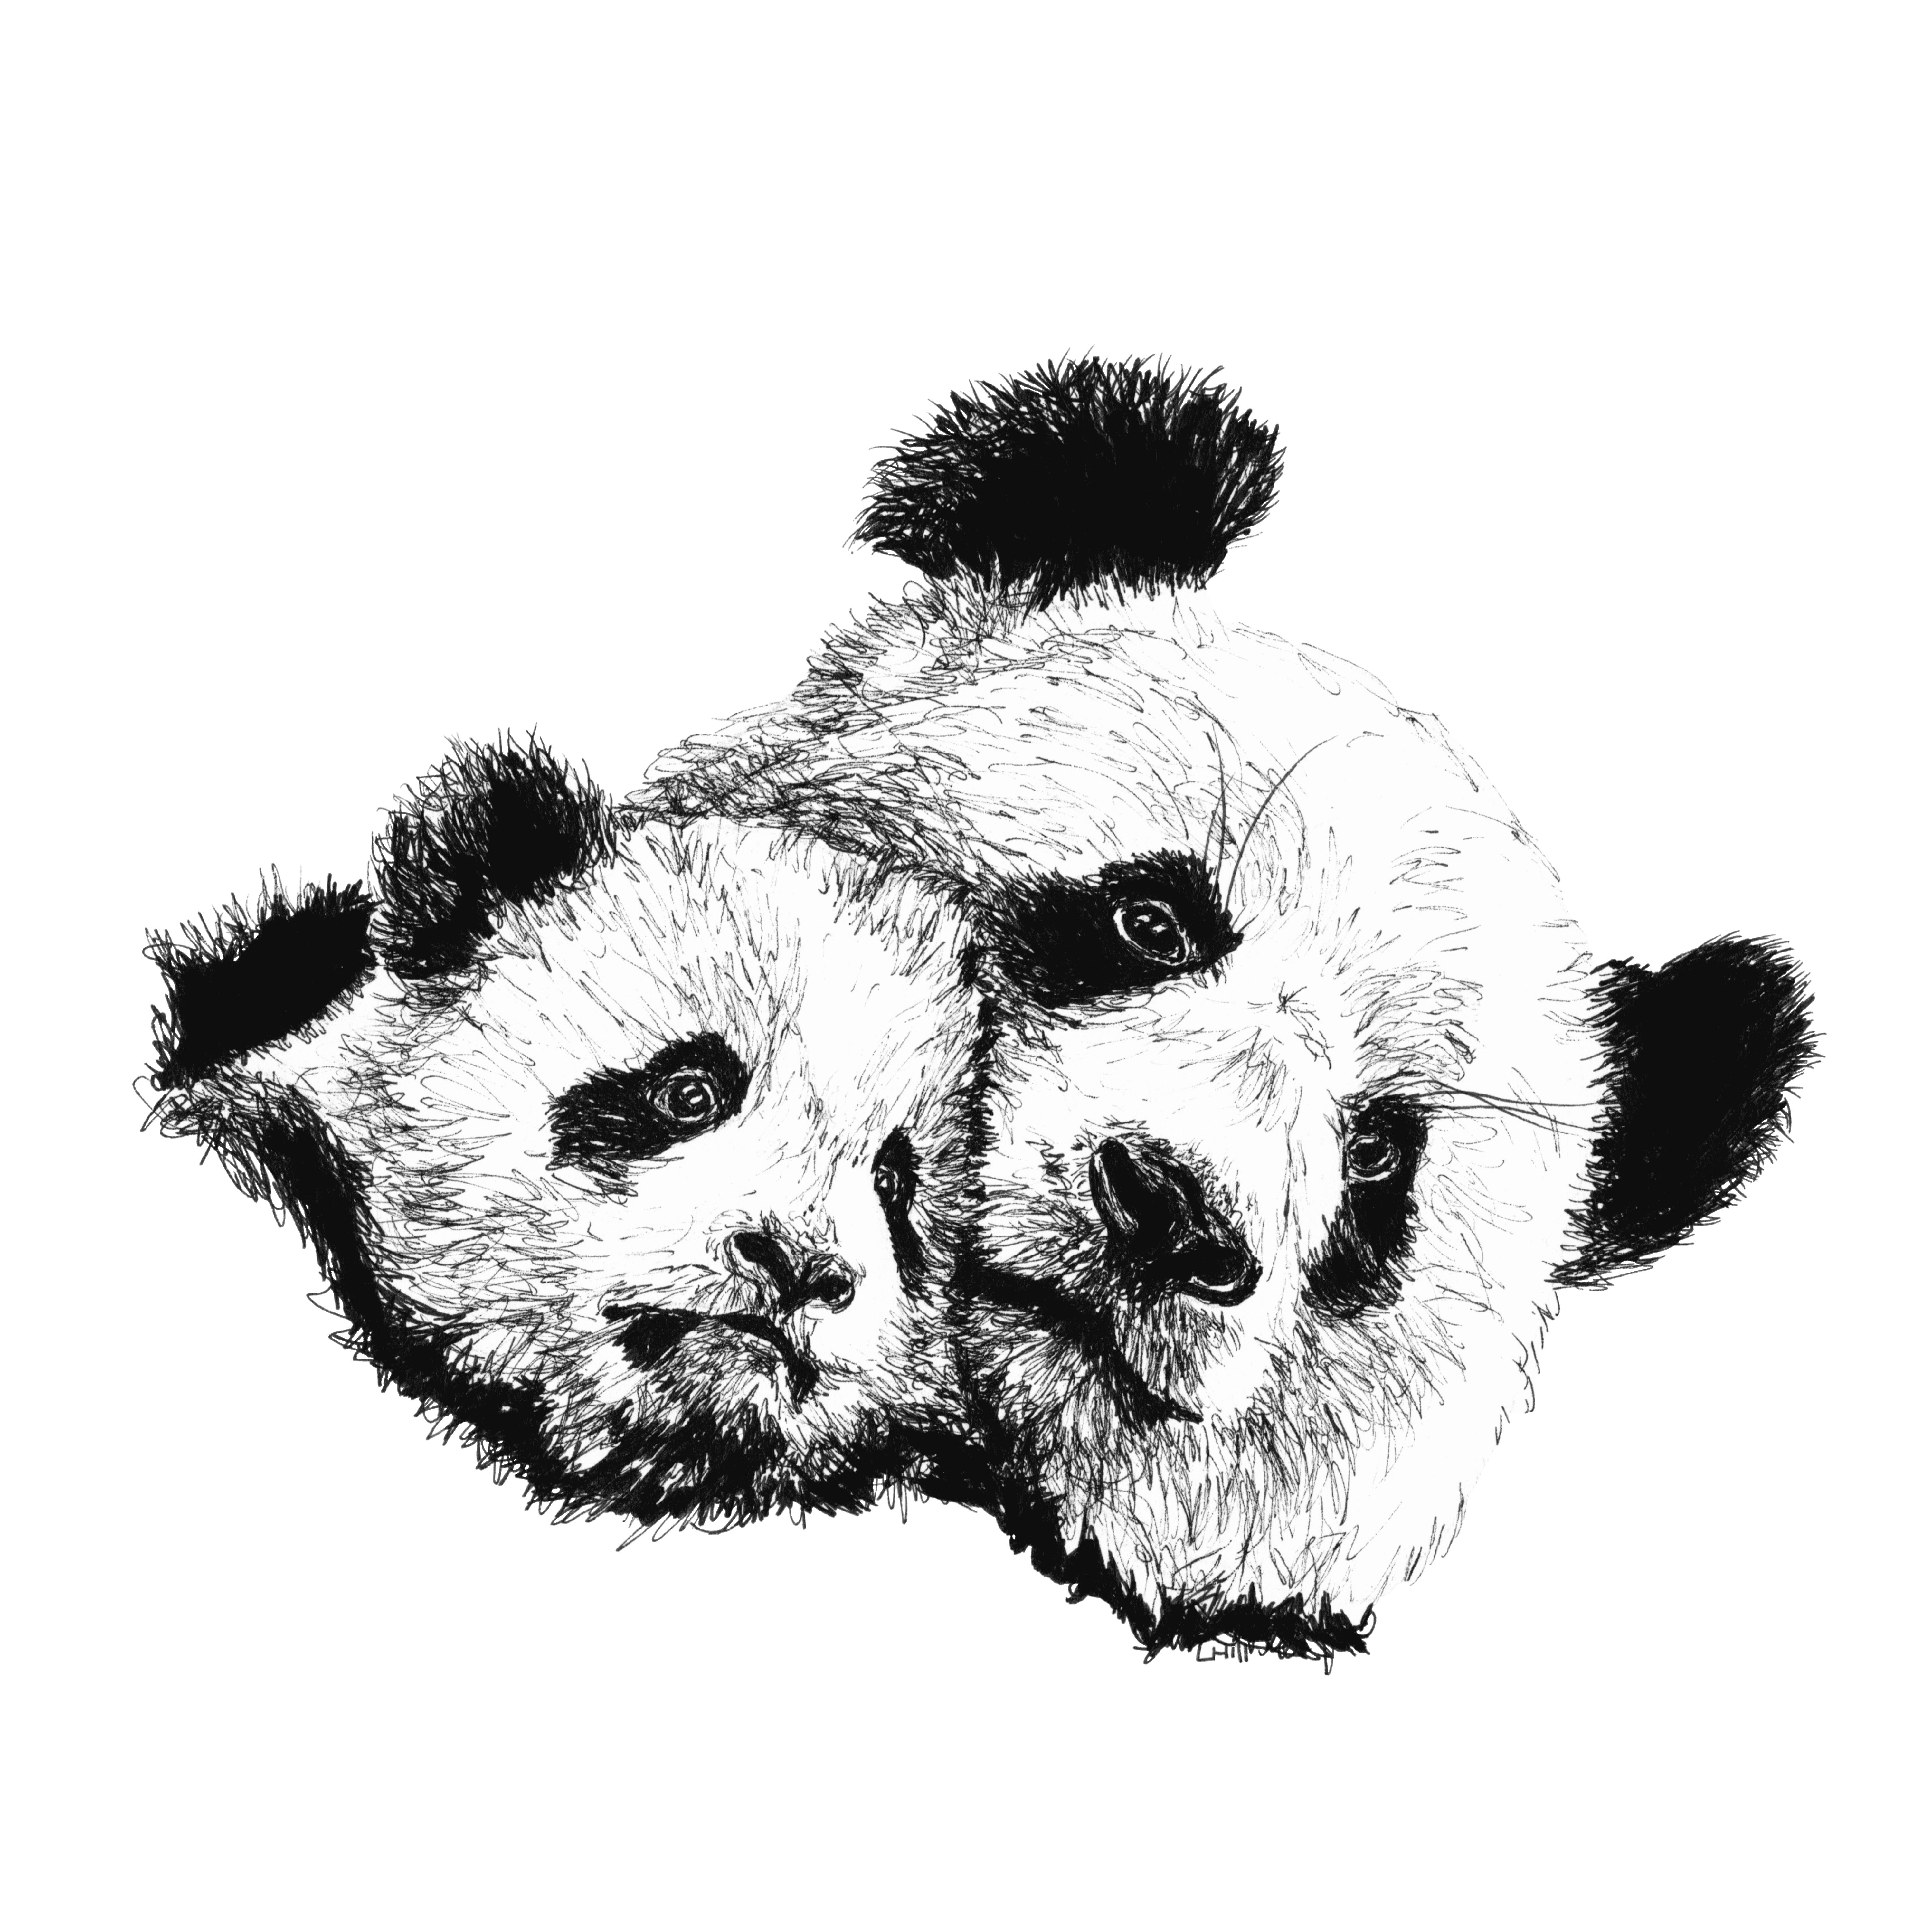 Panda and Cub pen and ink illustration by Louisa Hill